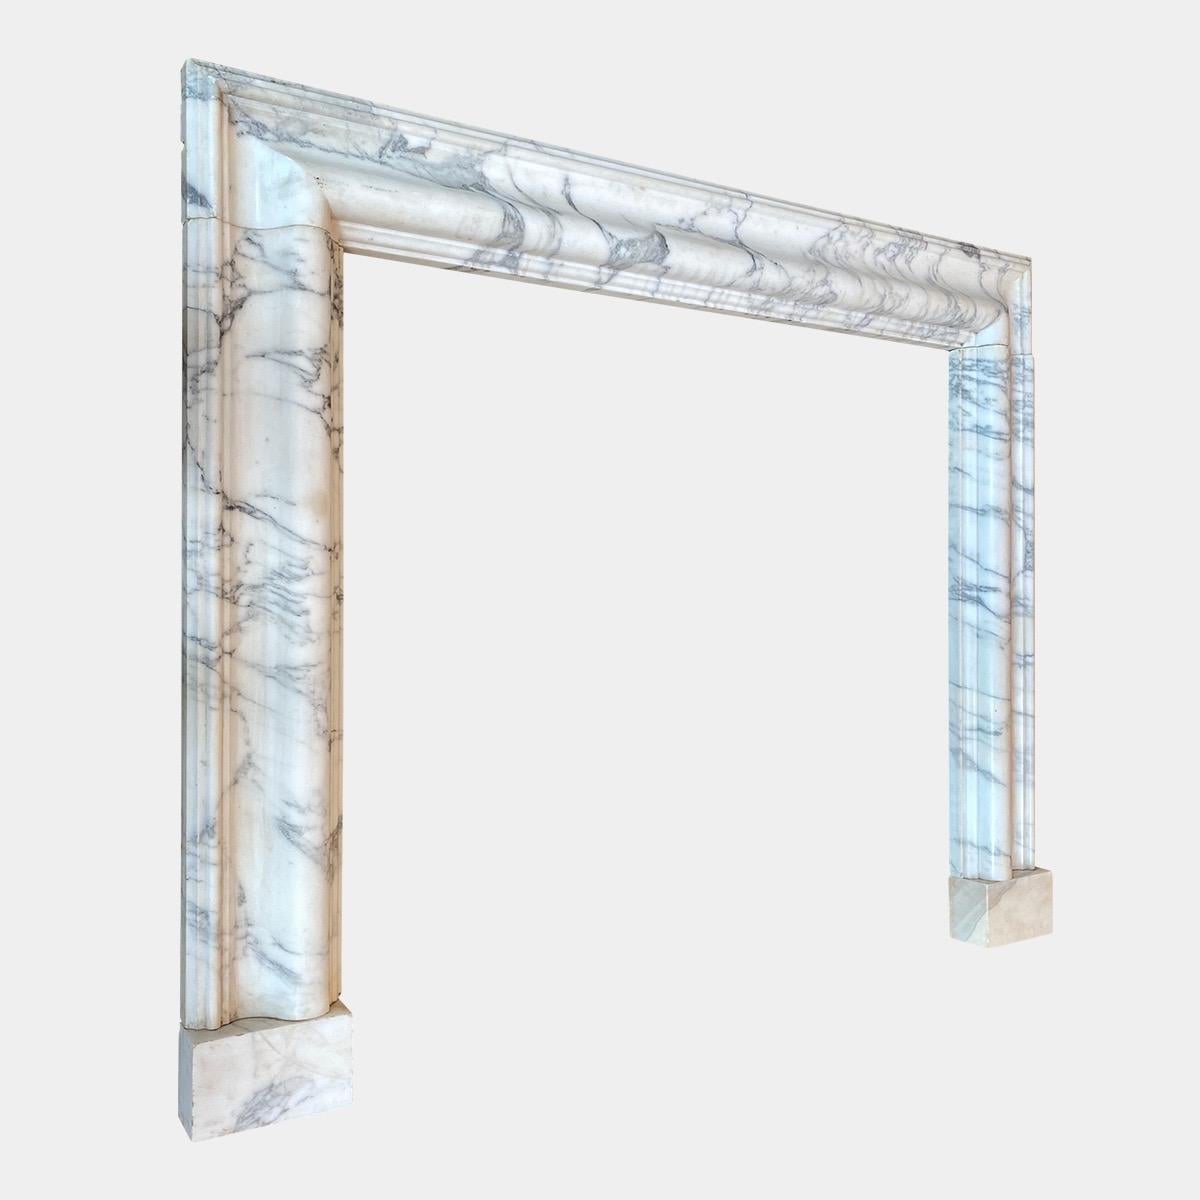 A 20th century re claimed Bolection in Italian Arabescato marble. The moulded frame with stepped outer and inner edge stood on separate foot blocks.

Opening size: 104.5cm W x 99.5cm H.